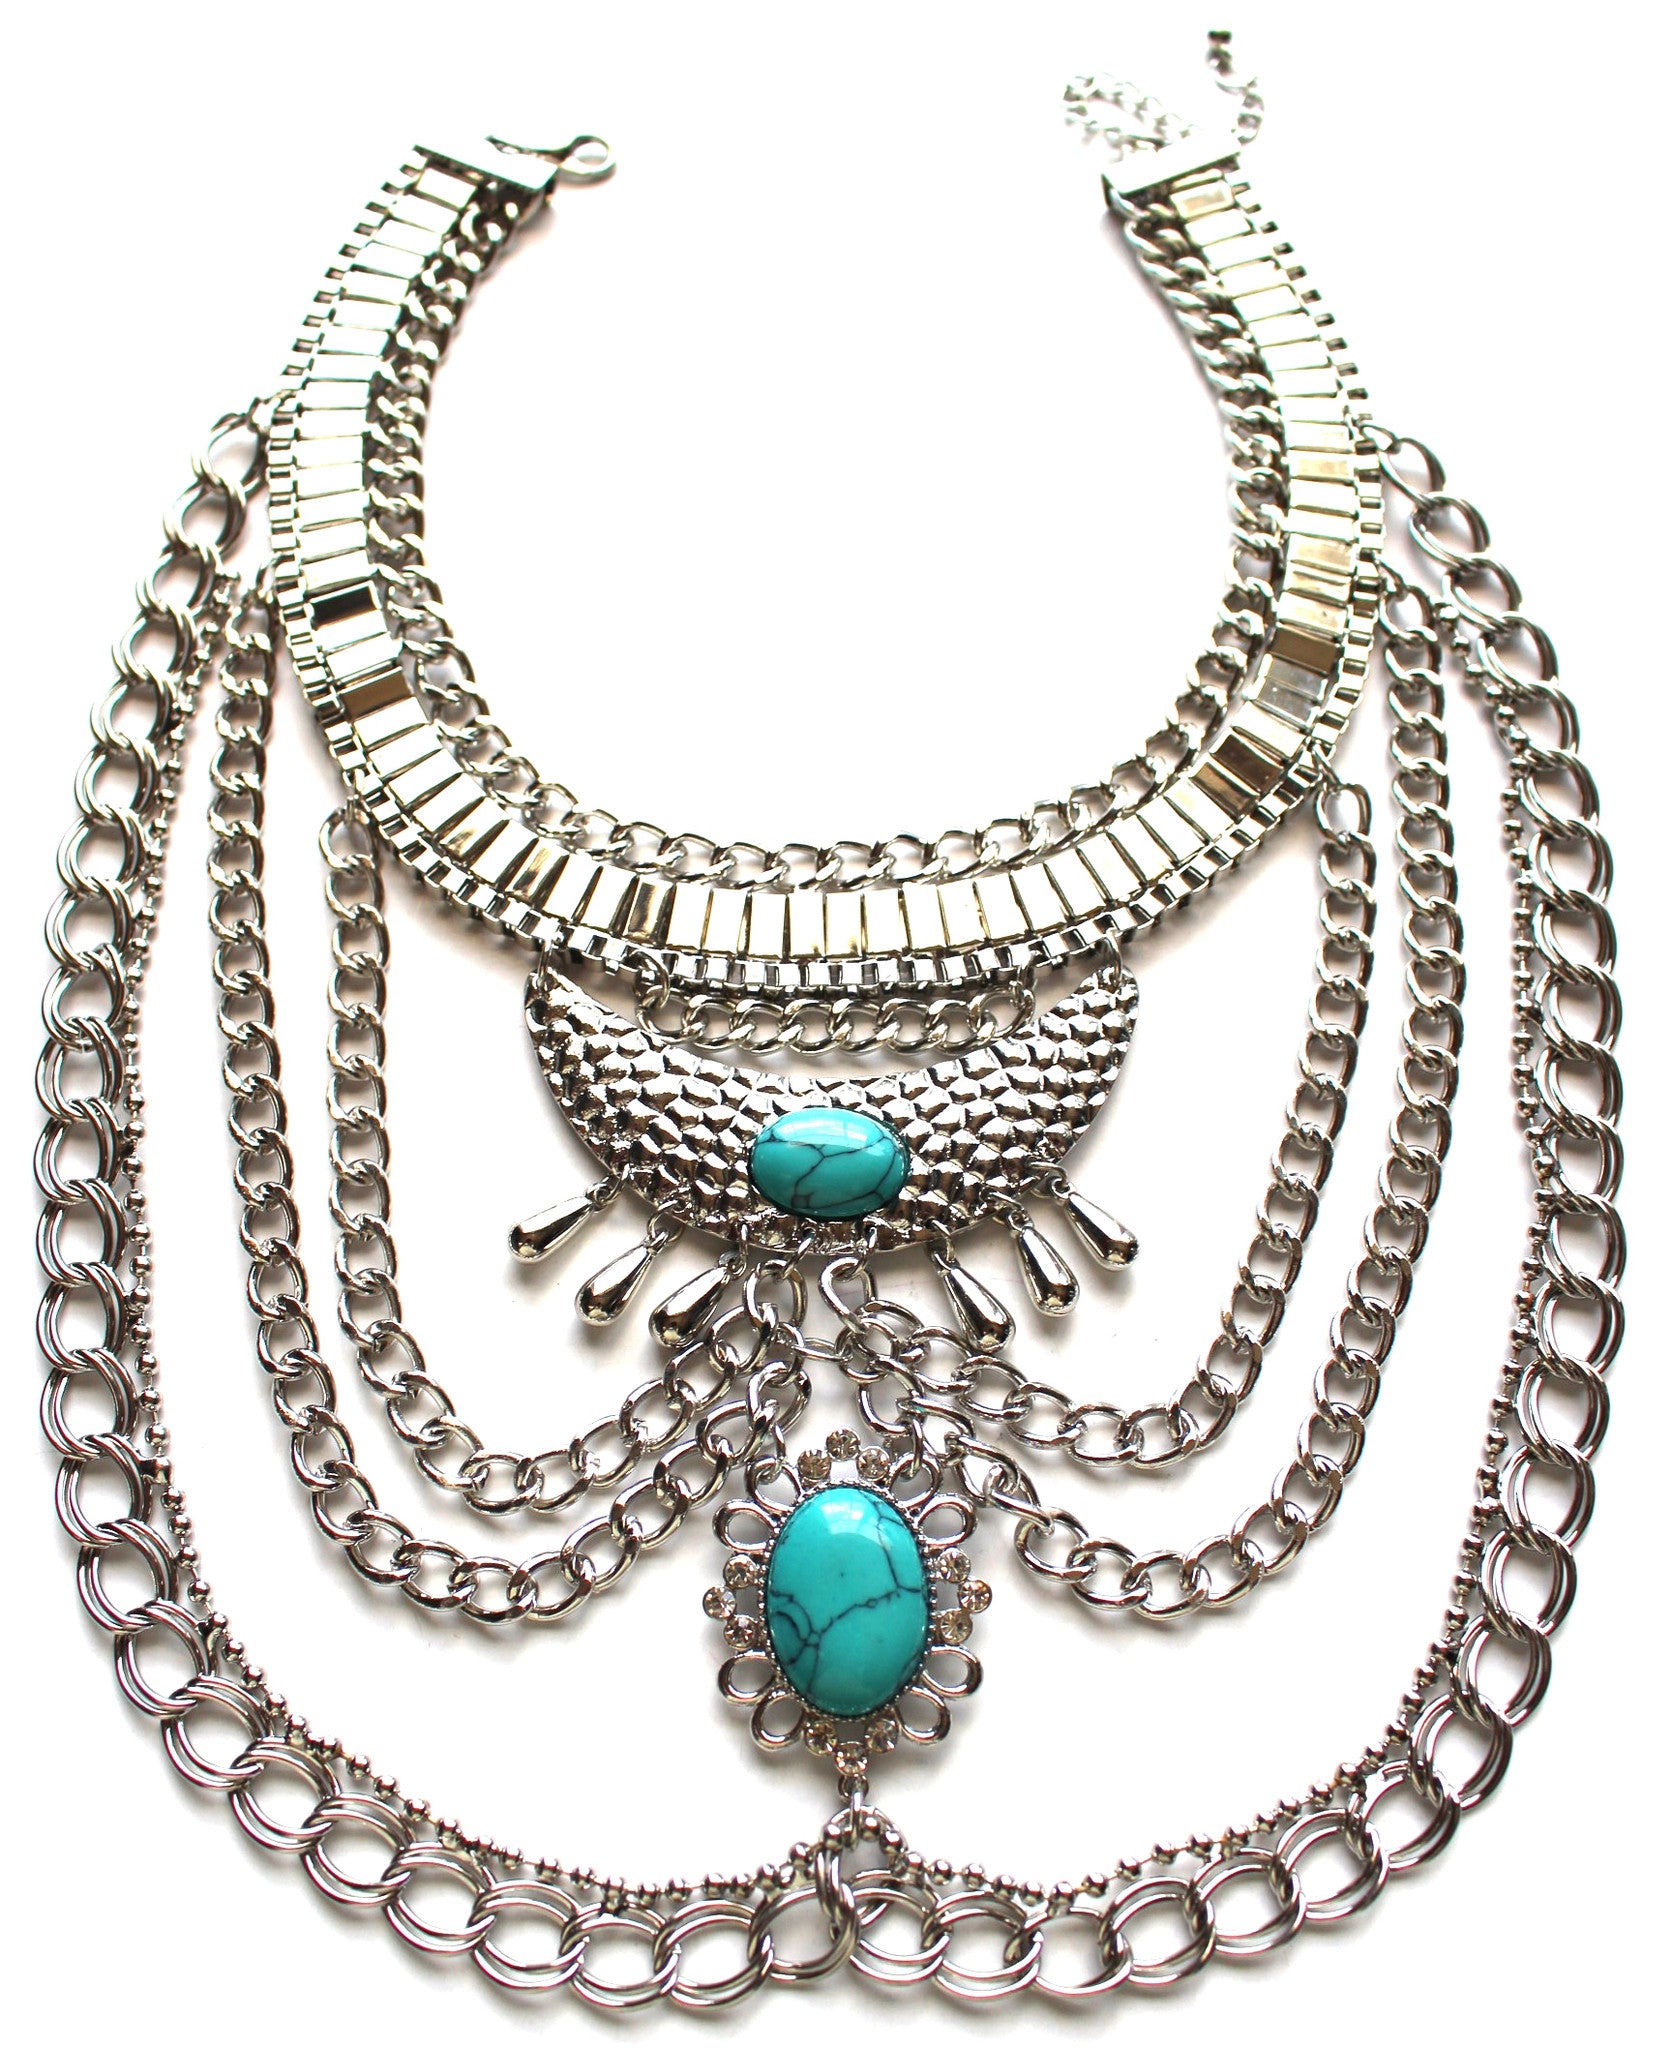 Native Goddess Draped Chains Necklace- Turquoise Stone – KAY K COUTURE